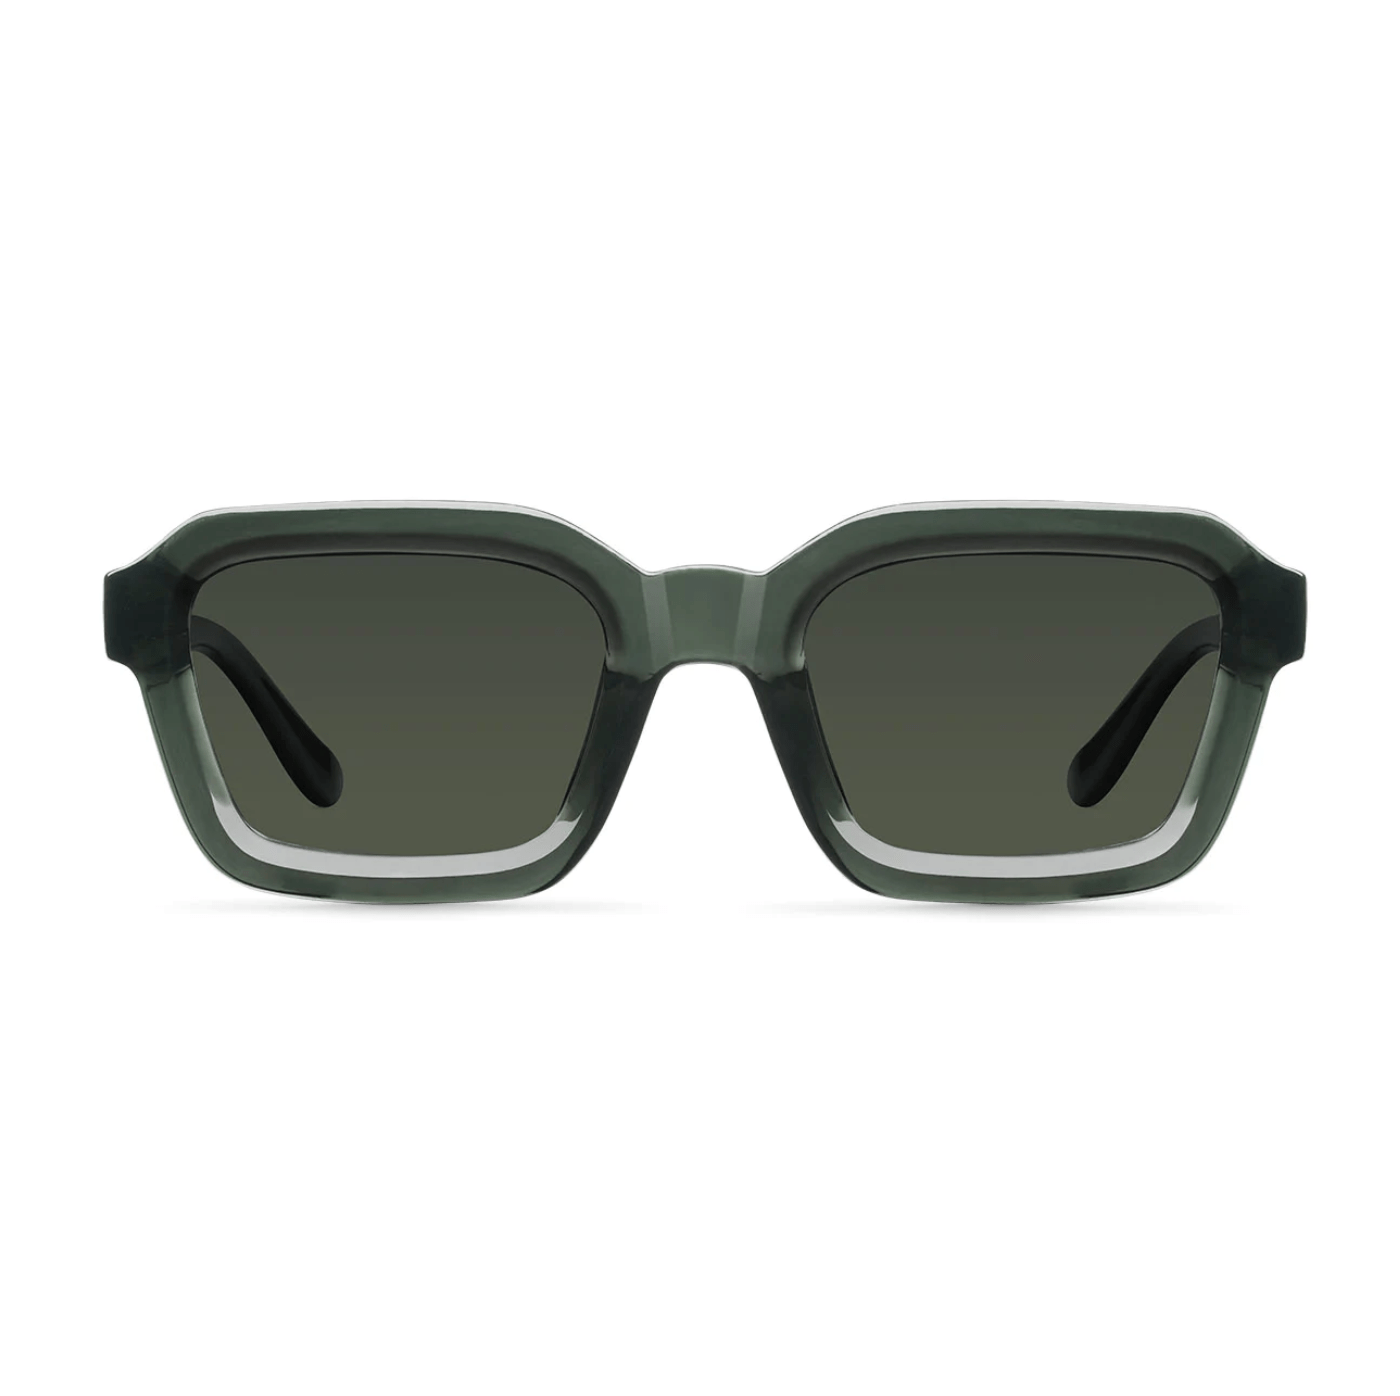 The Nayah green sunglasses feature the most exclusive design. Stylish, fresh and careless. 